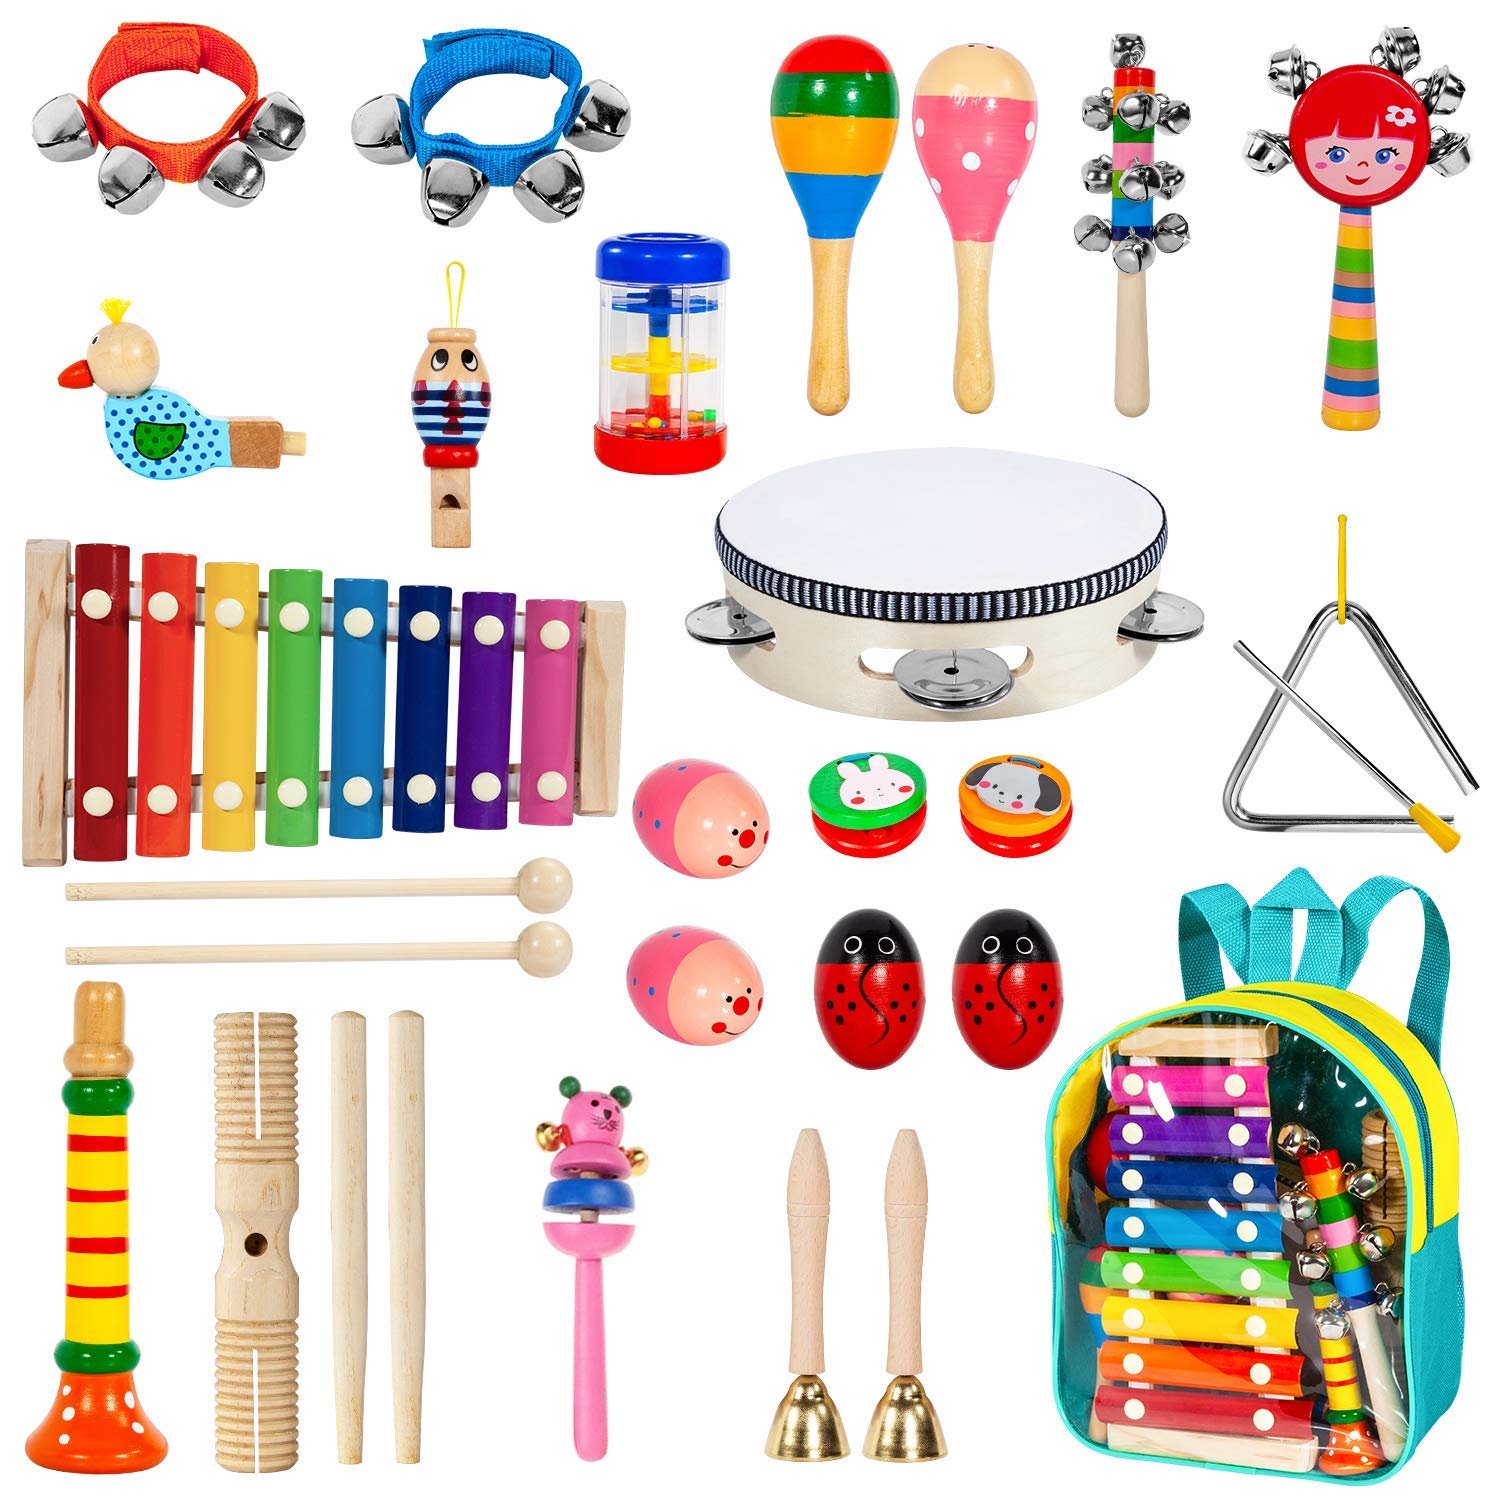 Toddler Musical Instruments with Xylophone,Ailuki 24pcs 17 Kinds of